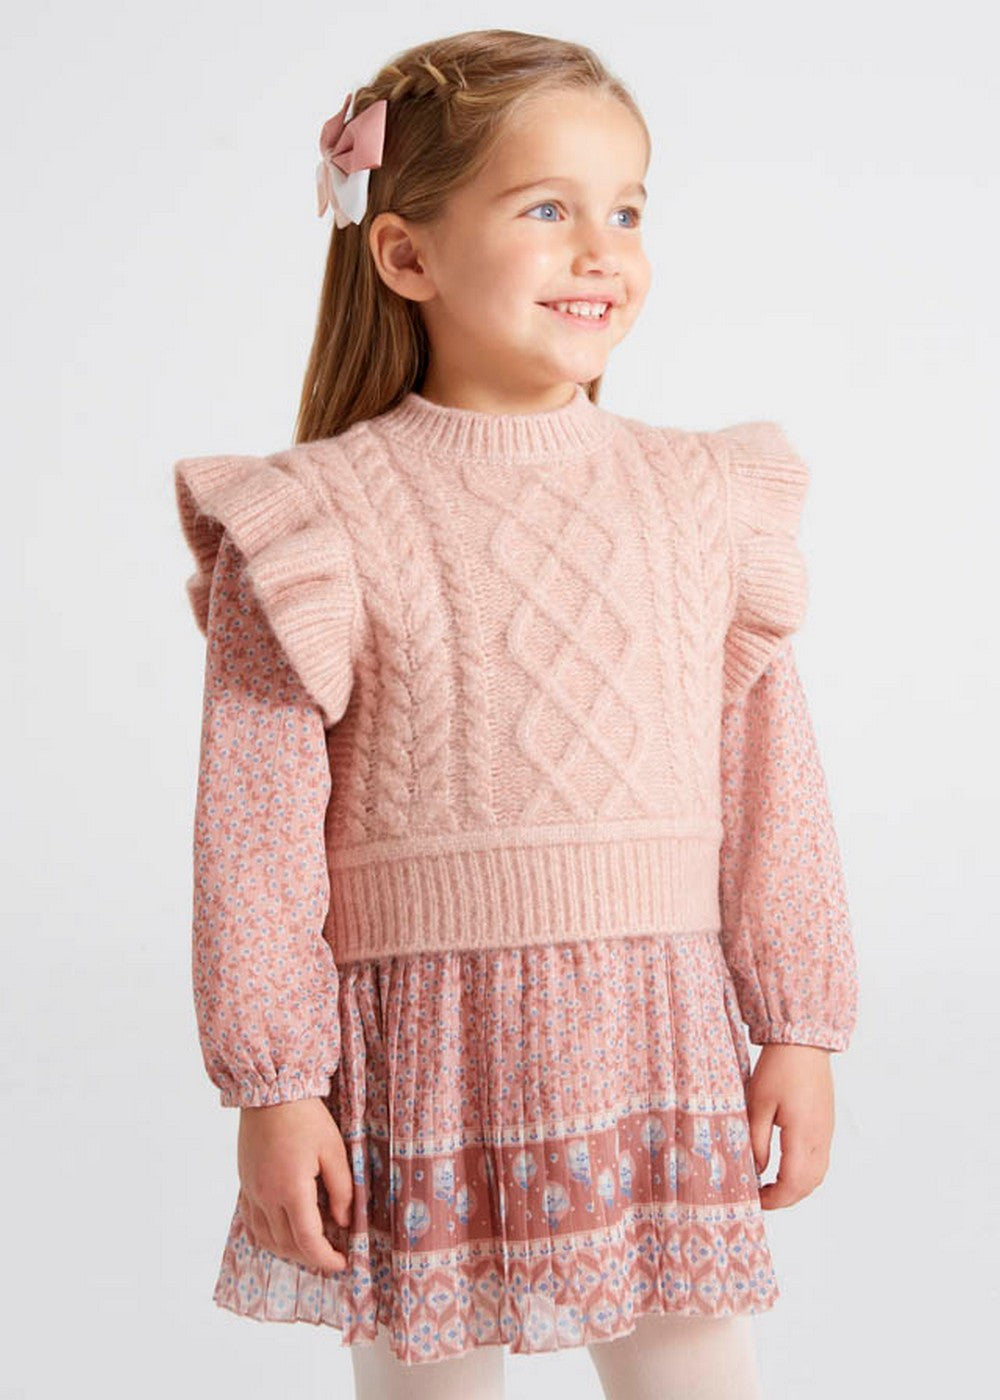 Gilet Tricot In Misto Lana Con Trecce Bambina MAYORAL 4313 - MAYORAL - LuxuryKids